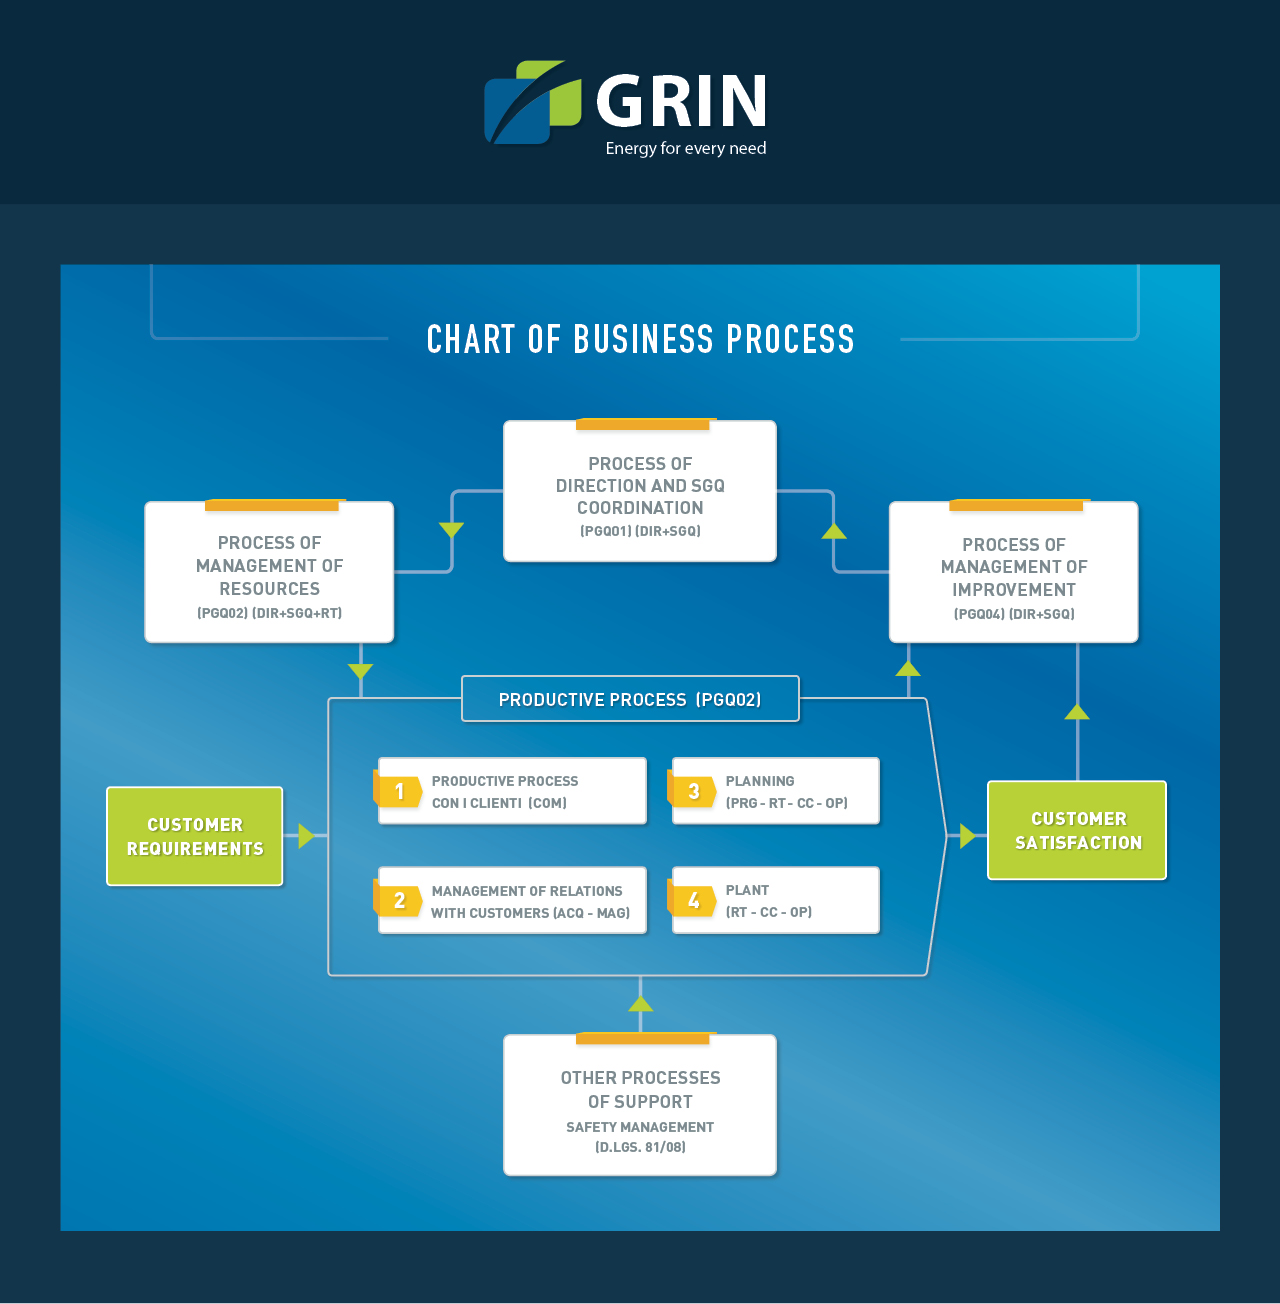 CHART OF BUSINESS PROCESS Grin